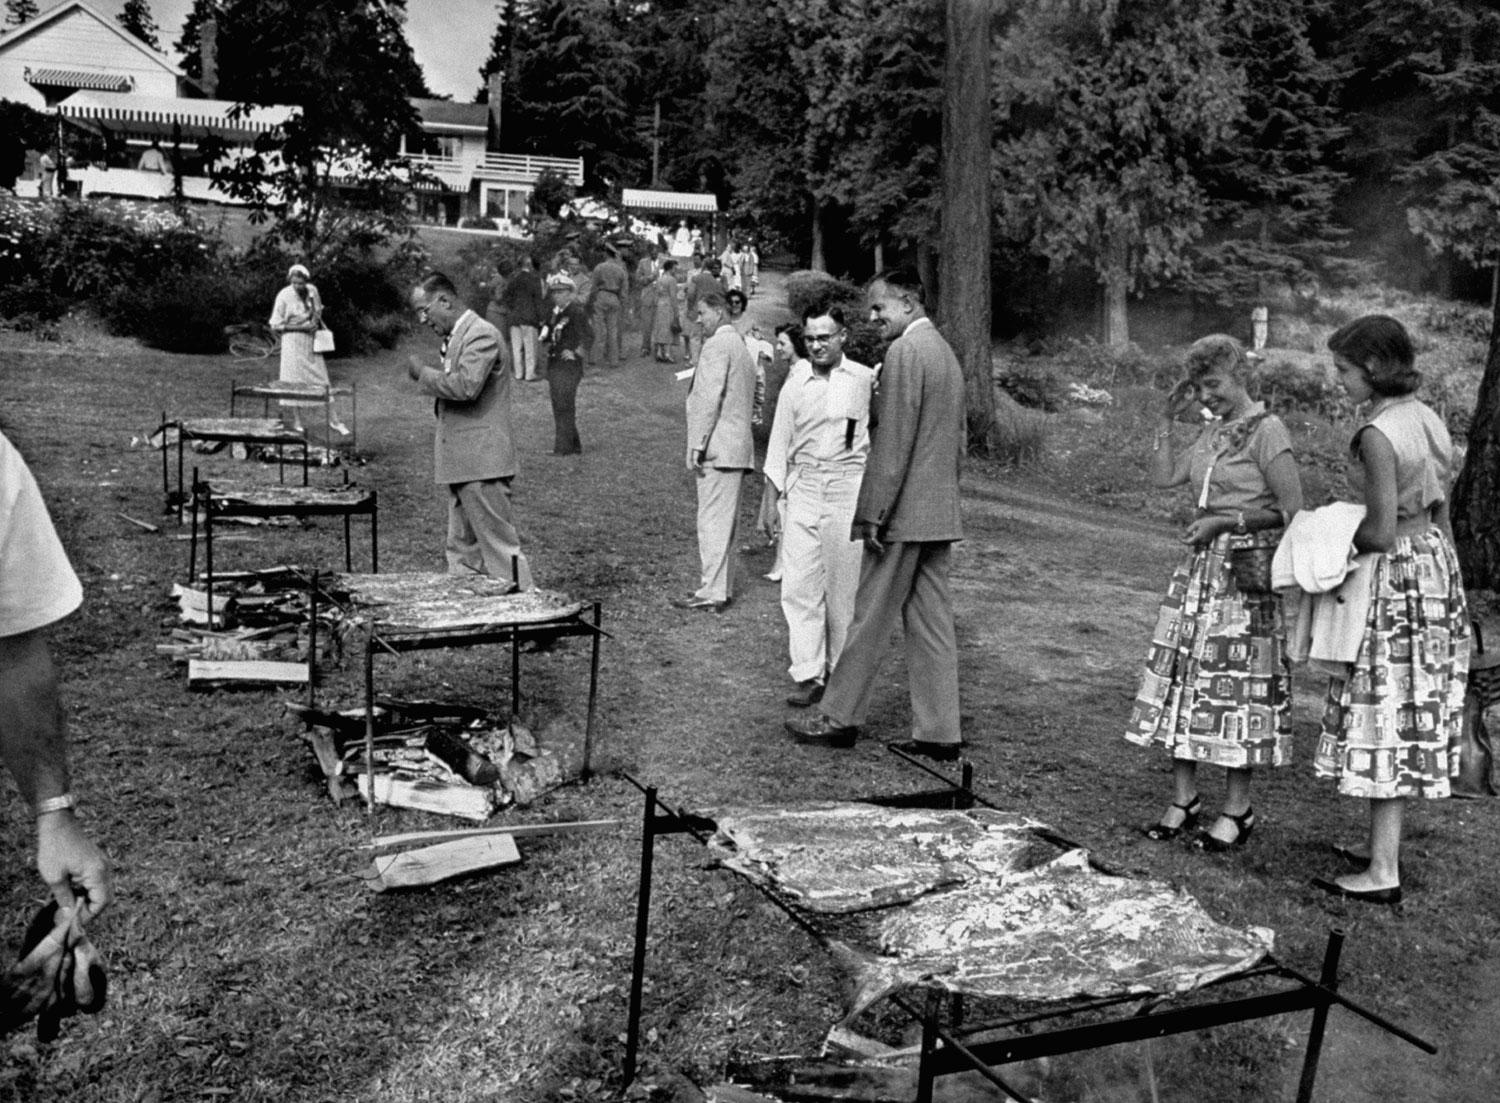 John D. Lodge (in the suit), the governor of Connecticut from 1951-55, surveys the scene at a salmon barbecue in 1953.